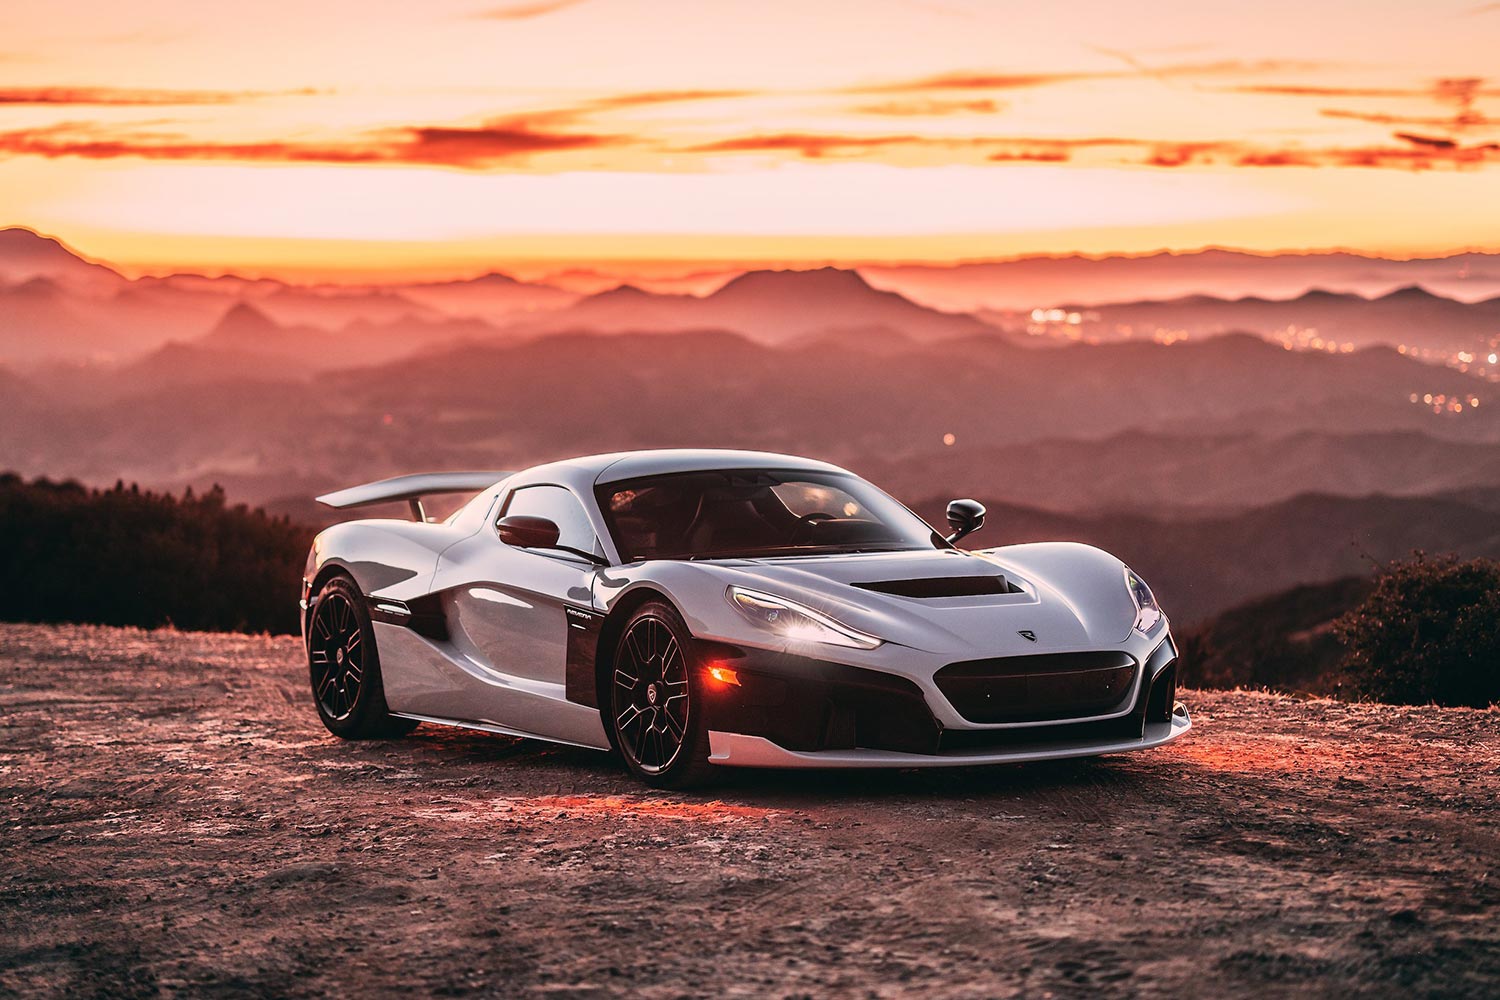 The Rimac Nevera electric supercar sitting on a cliff while the sun sets